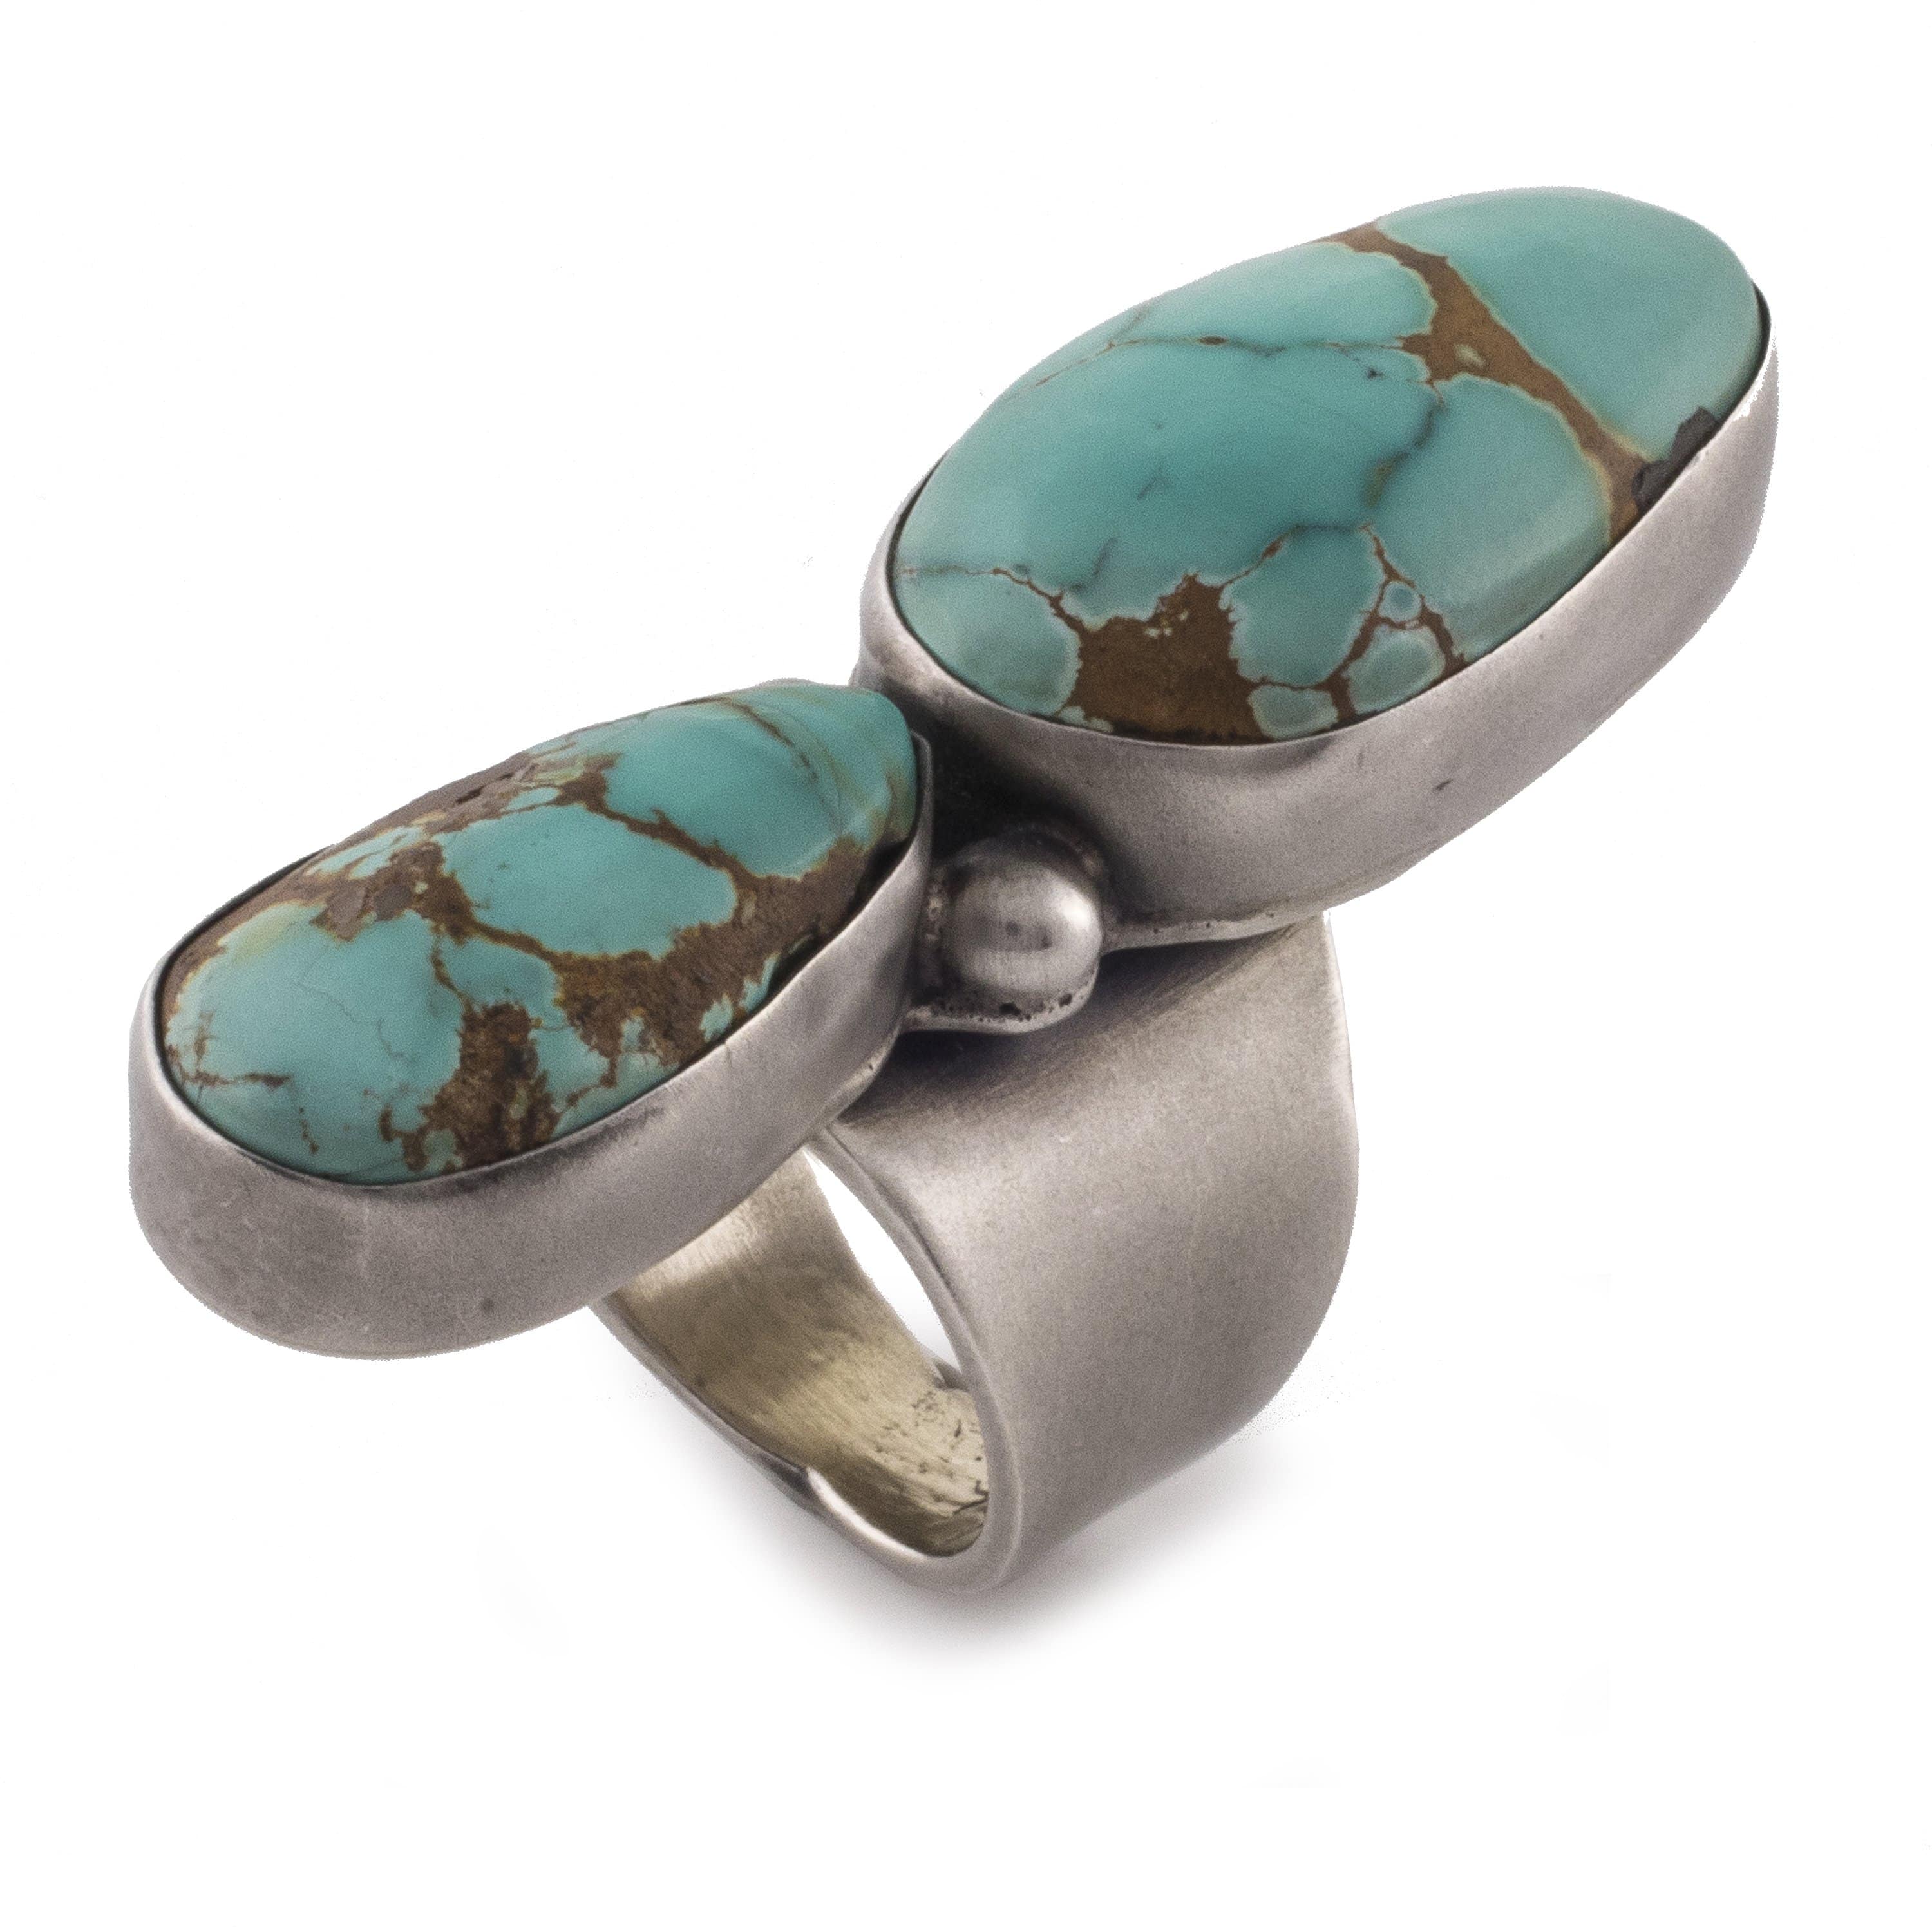 Kalifano Native American Jewelry 6 Royston Turquoise USA Native American Made 925 Sterling Silver Ring NAR900.012.6